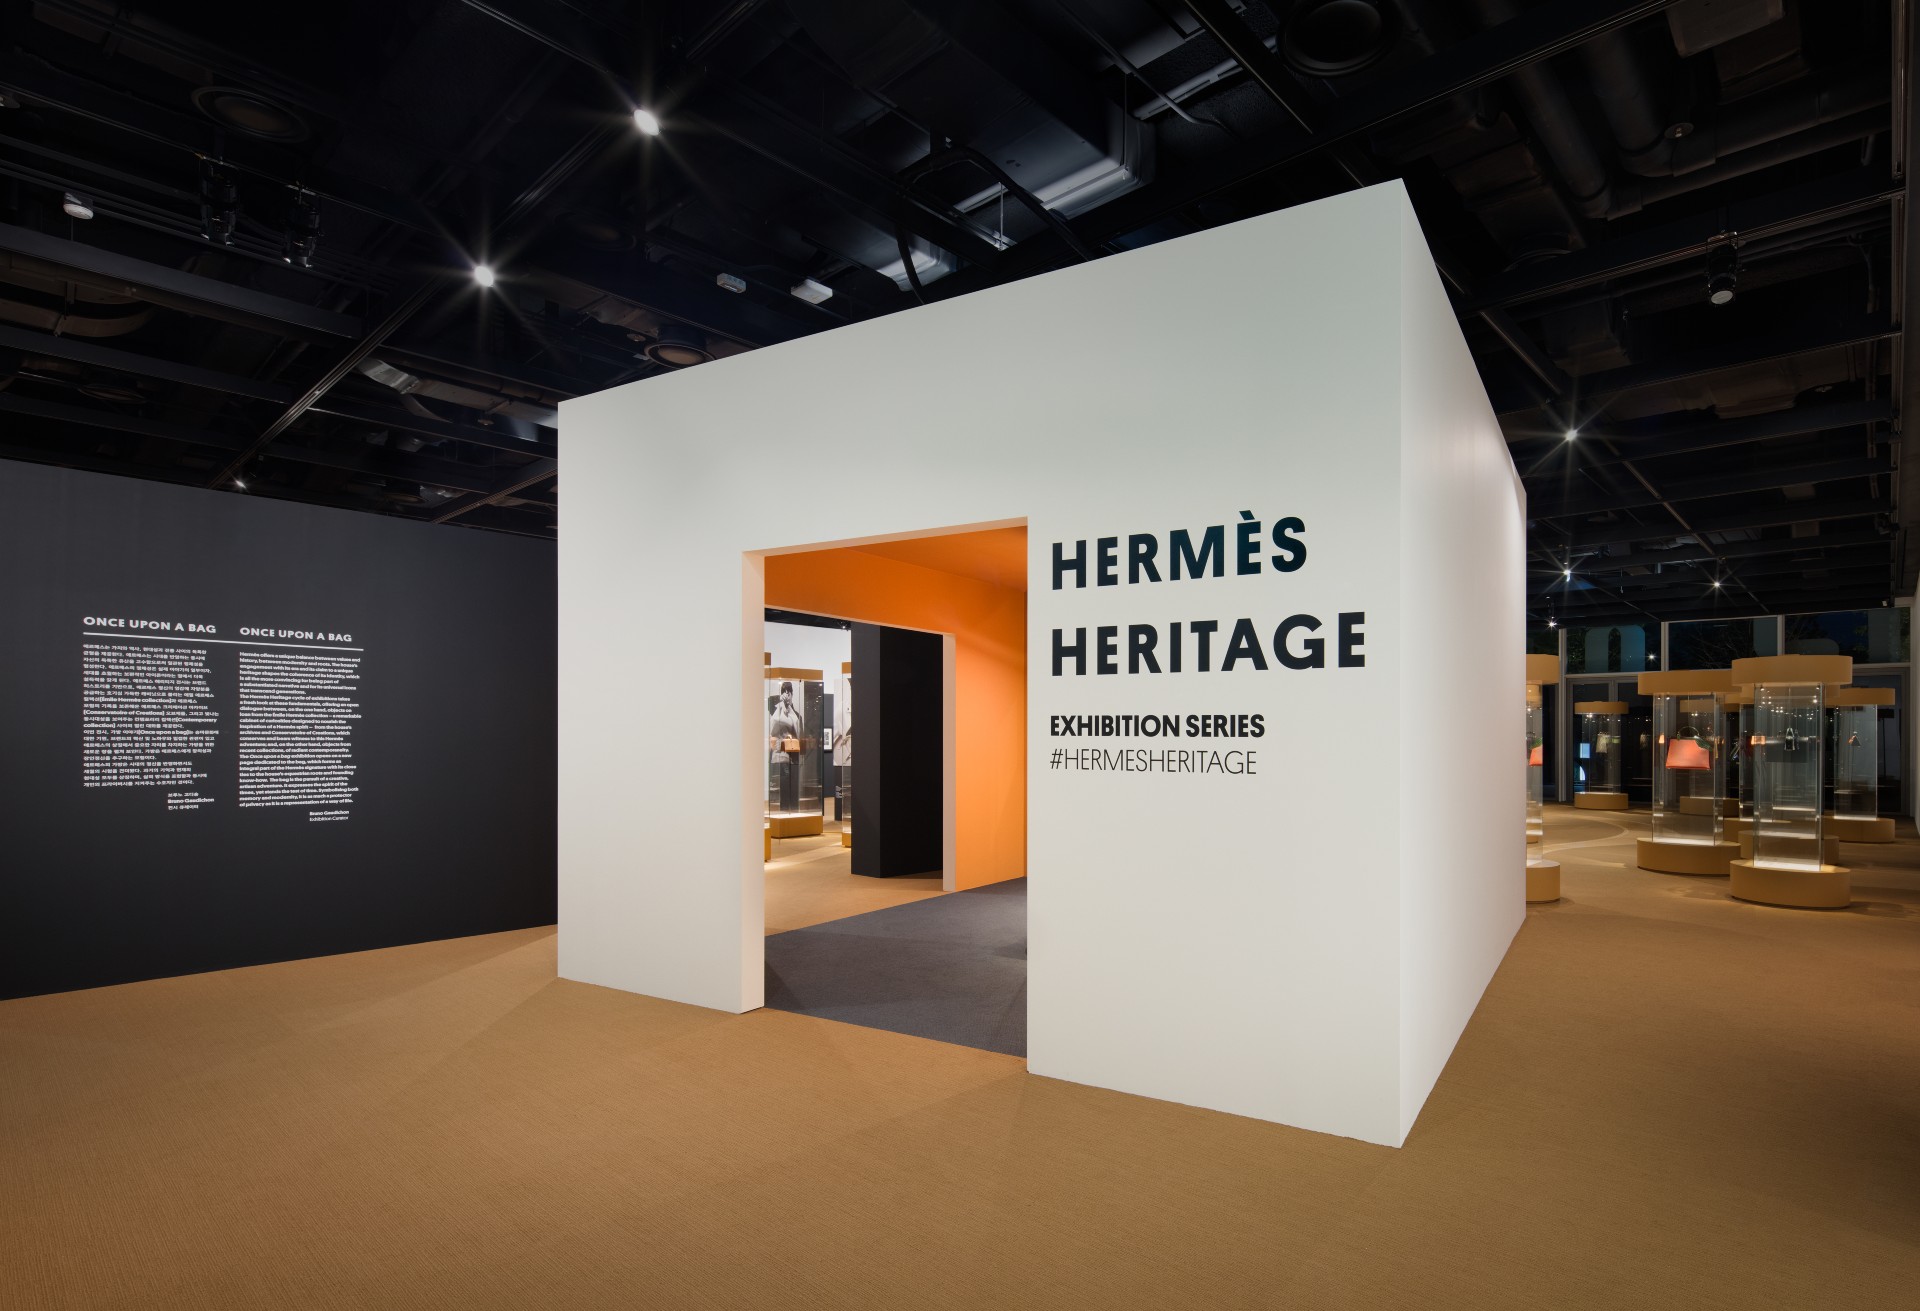 Hermès on X: The Once Upon a Bag exhibition retraces the